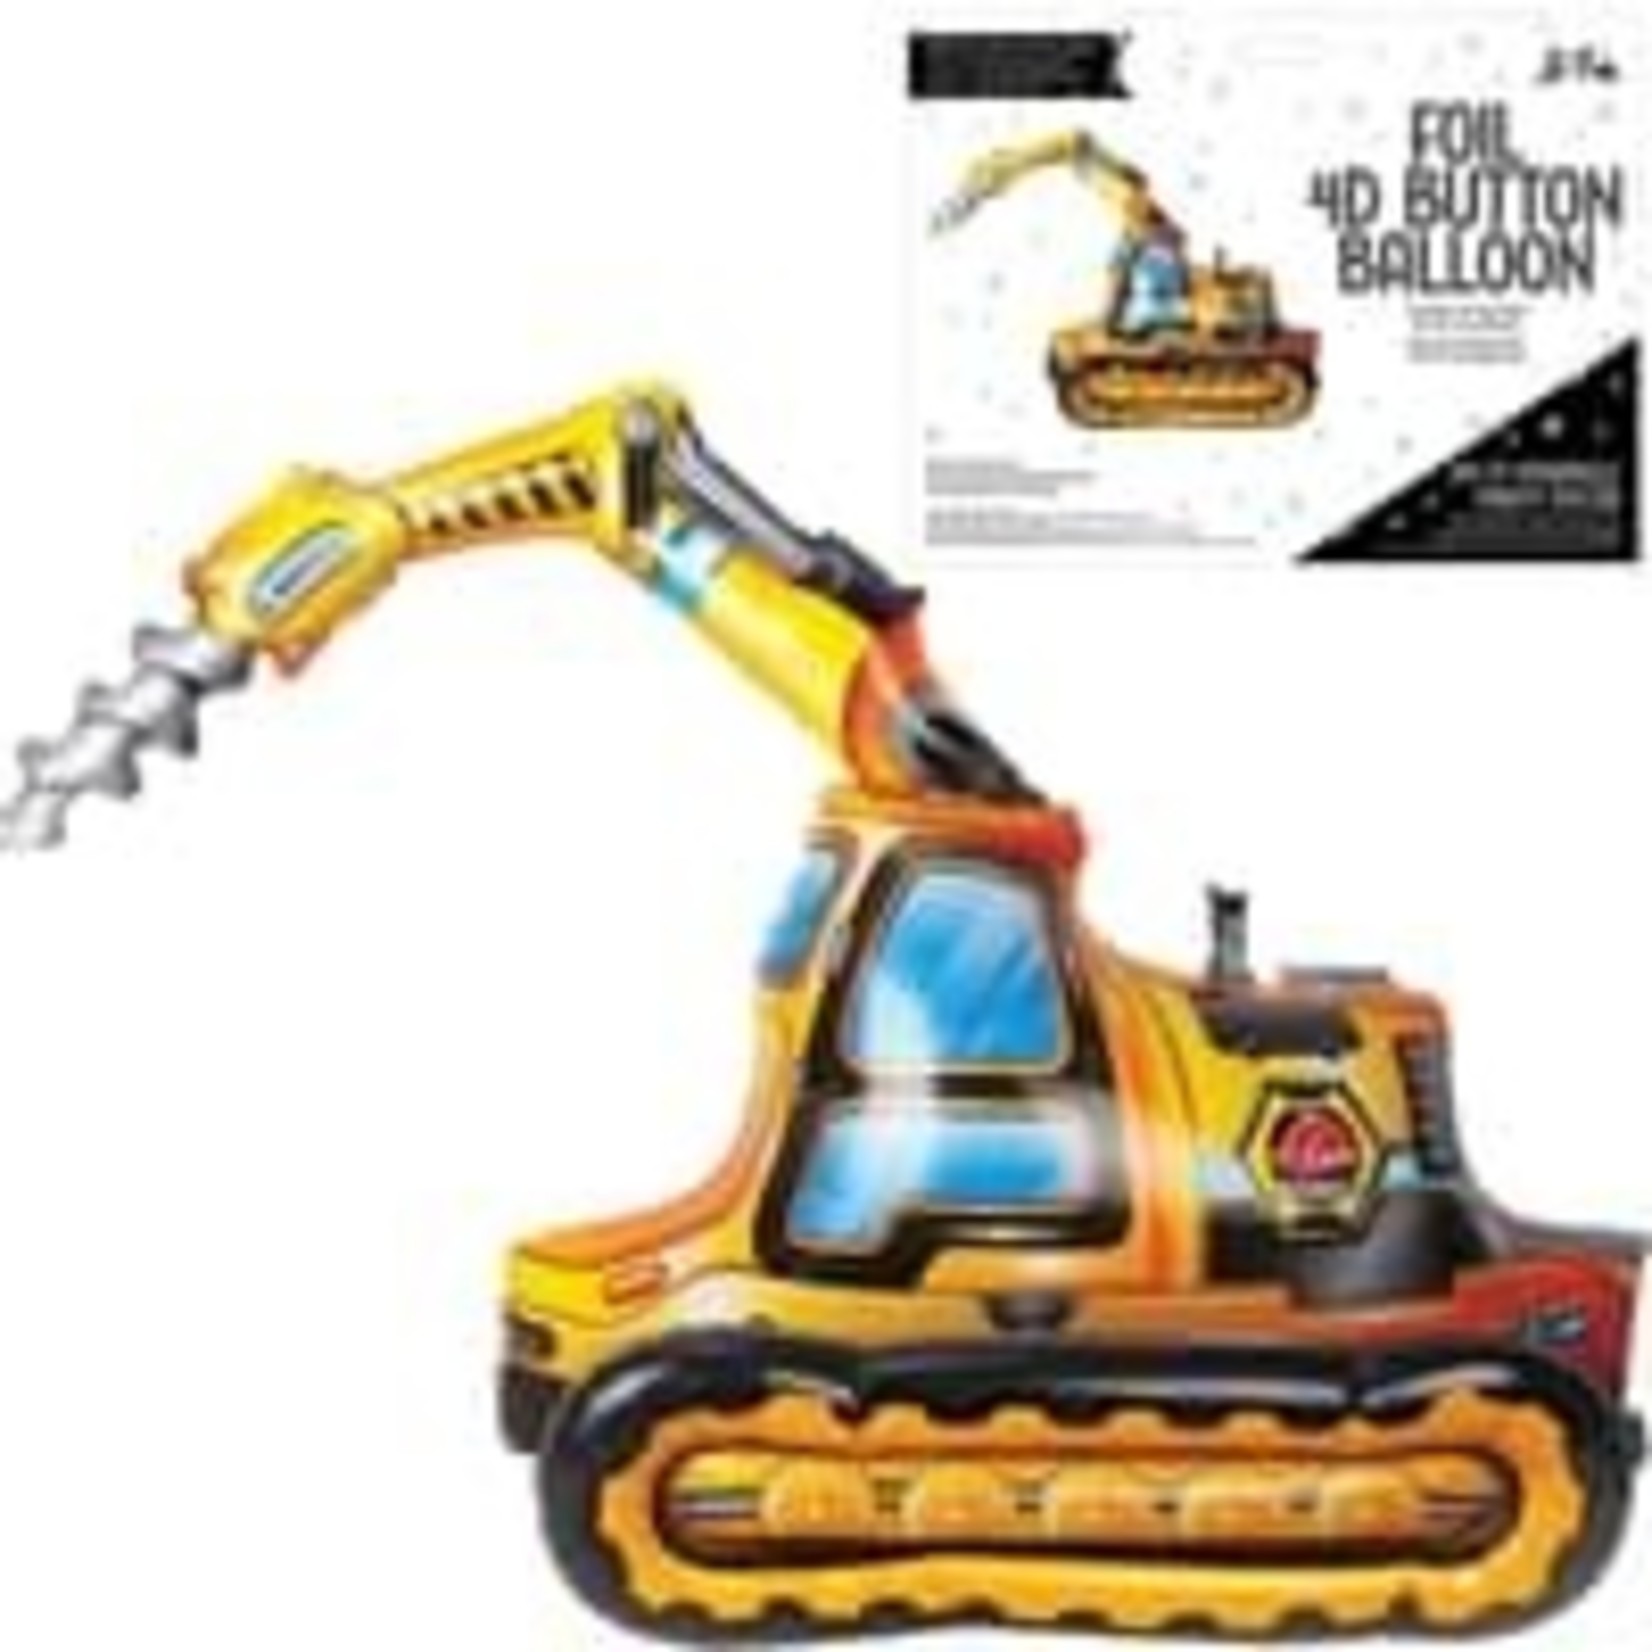 La Fete 39" Drill Excavator 4D Balloon - 1ct. (Air-Filled Only)